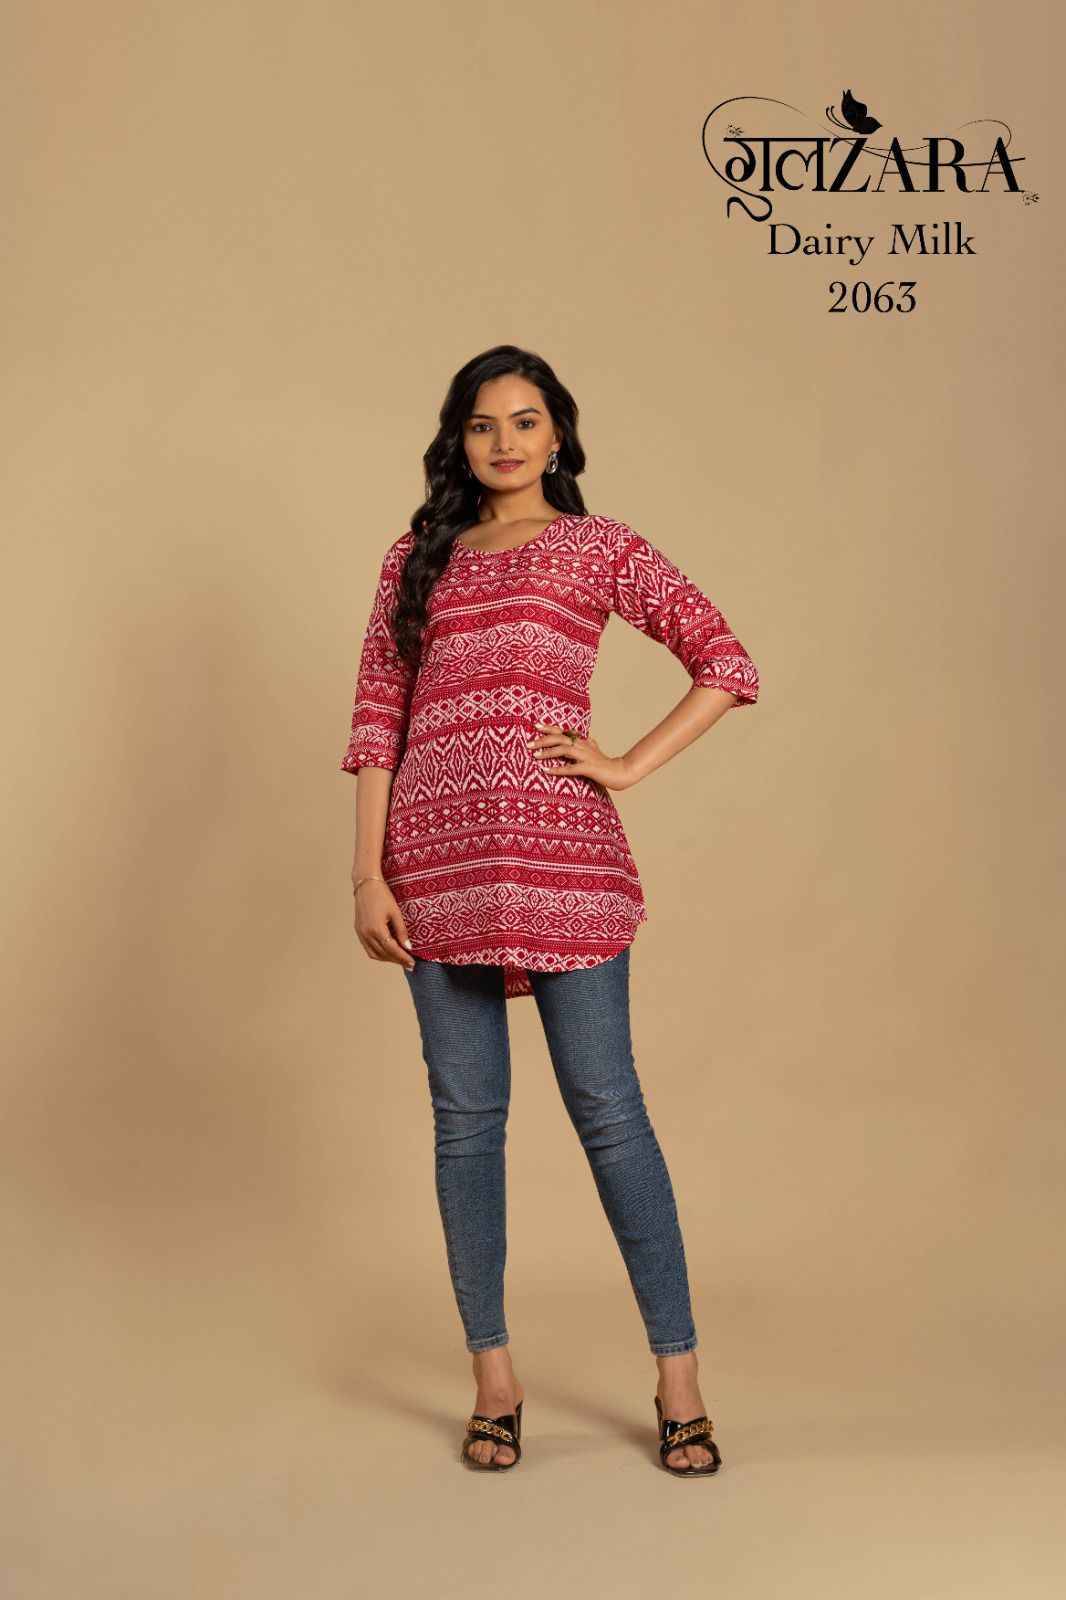 Dairy Milk By Gulzara 2062 To 2069 Series Designer Stylish Fancy Colorful Beautiful Party Wear & Ethnic Wear Collection Soft Crepe Print Tops At Wholesale Price